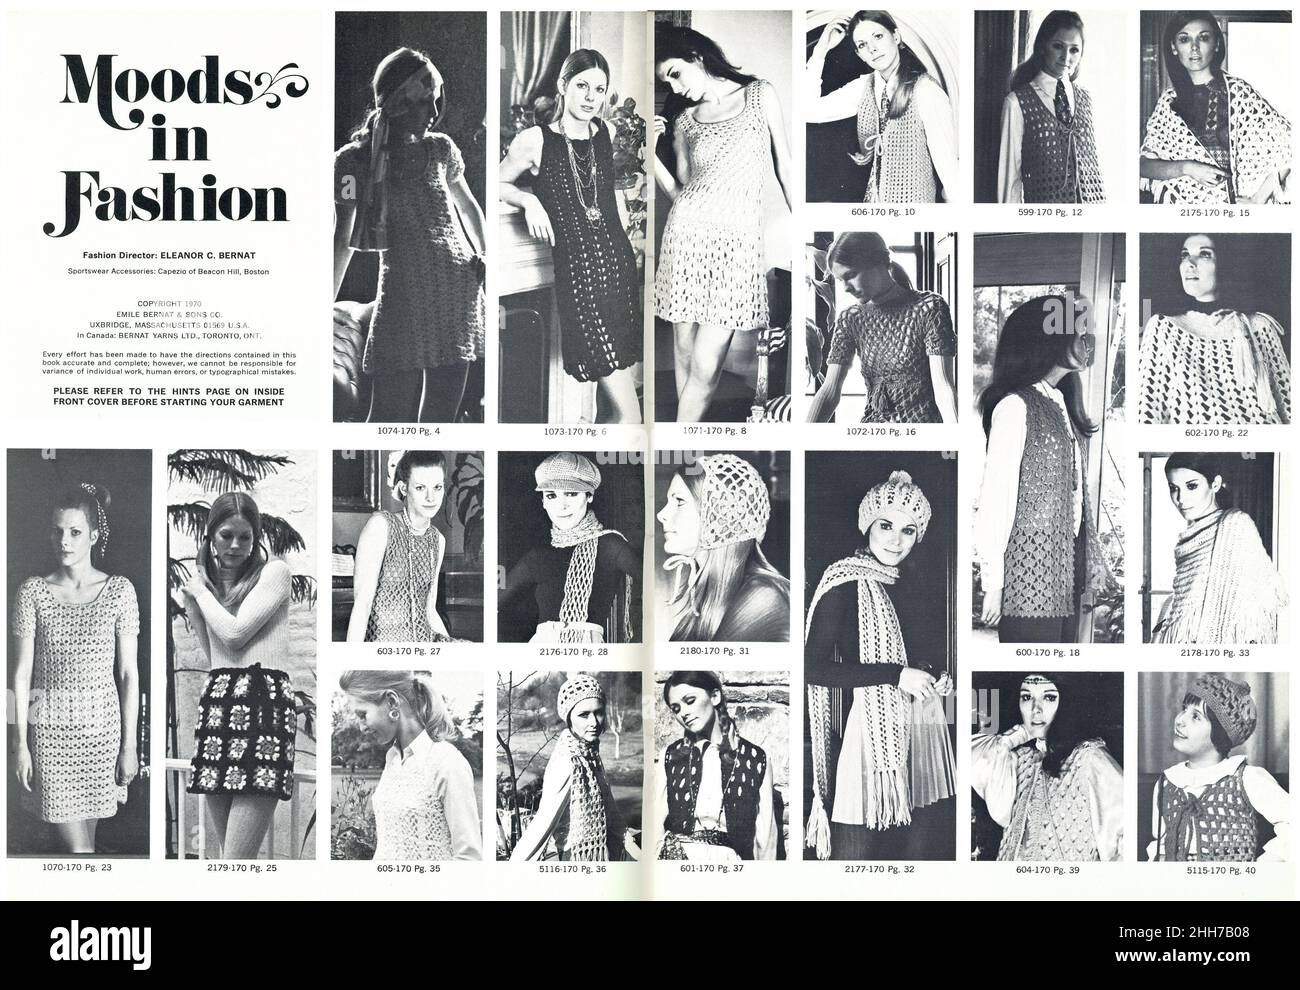 Vintage 'Moods in Fashion' by Bernat illustrated instruction book, USA  1970 Stock Photo